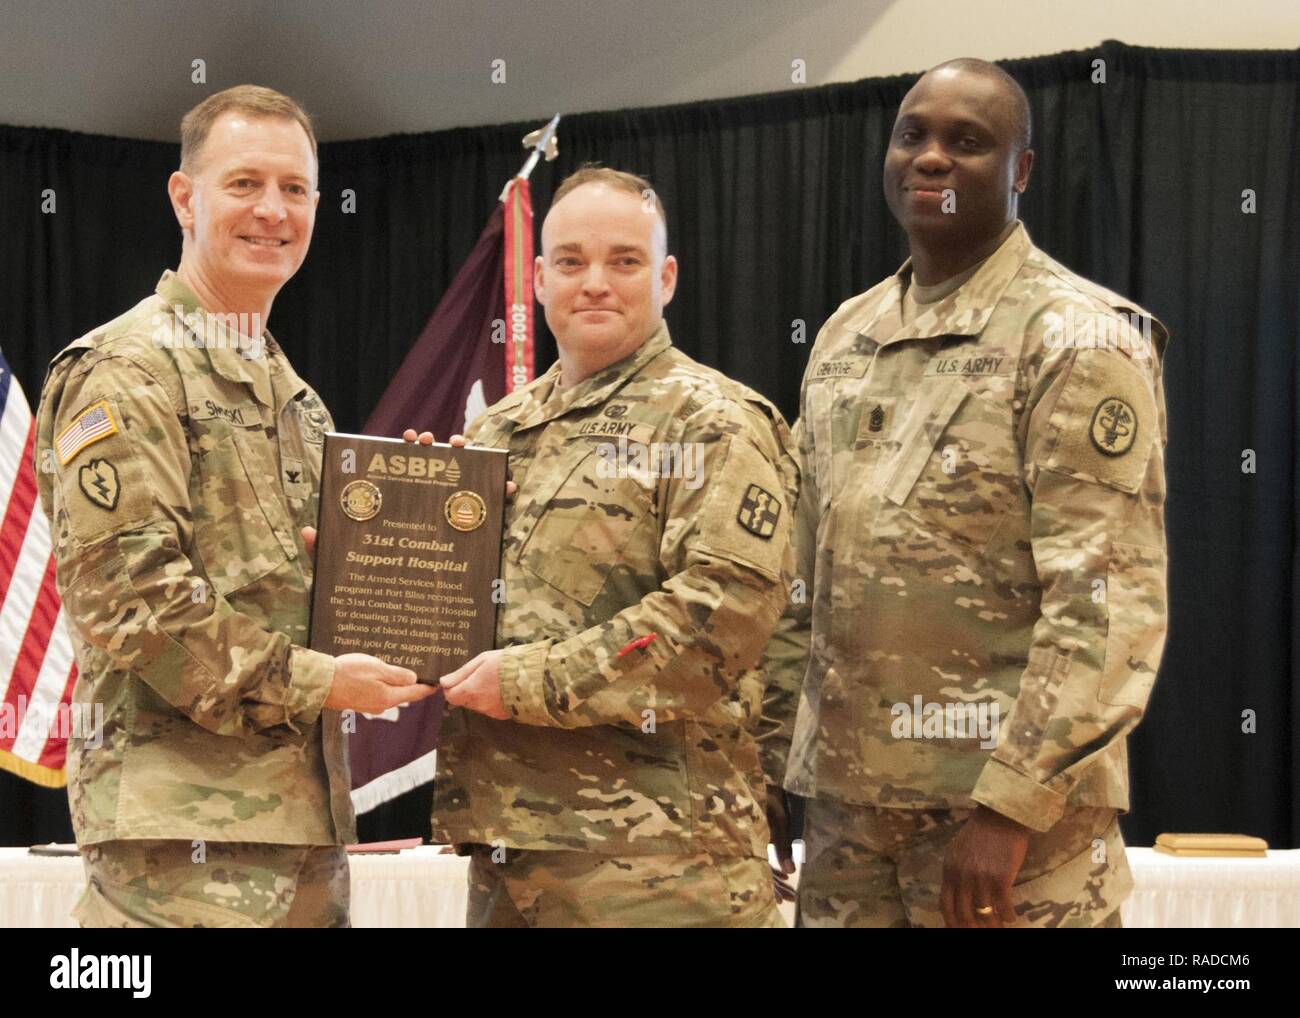 Col. John A. Smyrski III (left), commander, William Beaumont Army Medical Center, and Command Sgt. Maj. Donald George, command sergeant major, WBAMC, present a plaque to a Soldier with the 31st Combat Support Hospital for the unit’s overall blood donations equaling 22 gallons of blood, during the Fort Bliss Blood Donor Center’s annual Blood Donor Recognition Ceremony at the Centennial Banquet and Conference Center, Fort Bliss, Jan. 26. Stock Photo